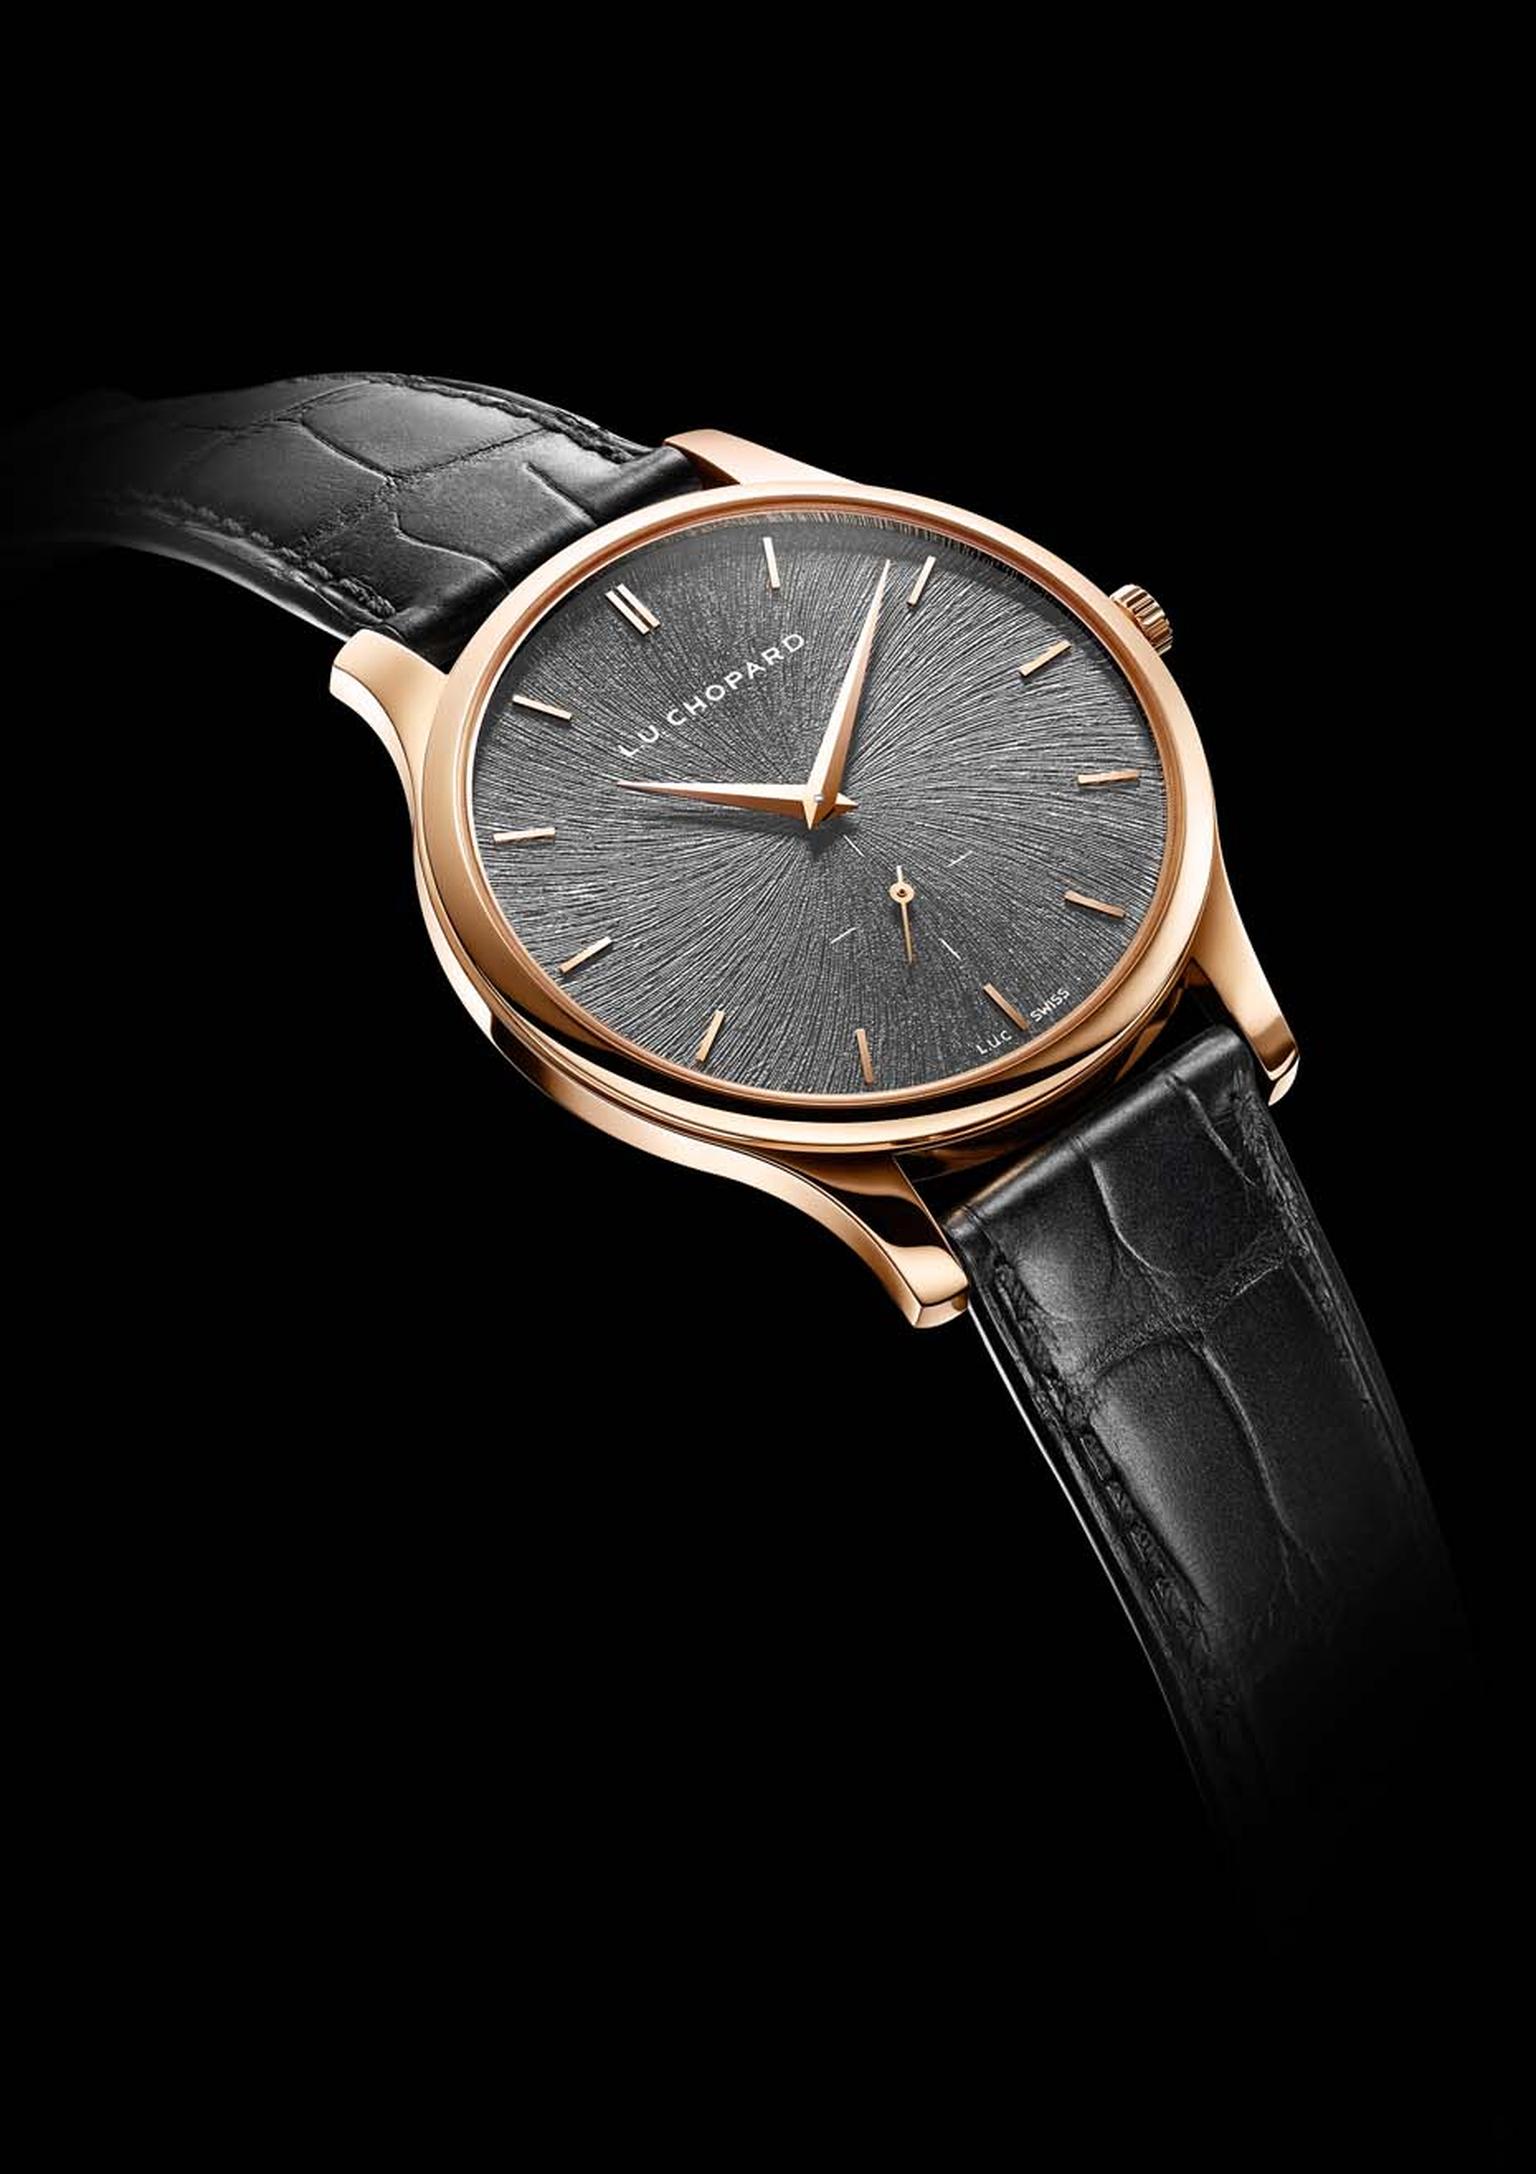 Chopard L.U.C XPS Fairmined gold watch for men is presented in a 39.50mm rose gold case with an elegant svelte profile of just 7.13mm, placing it in the ultra-thin category of dress watches.